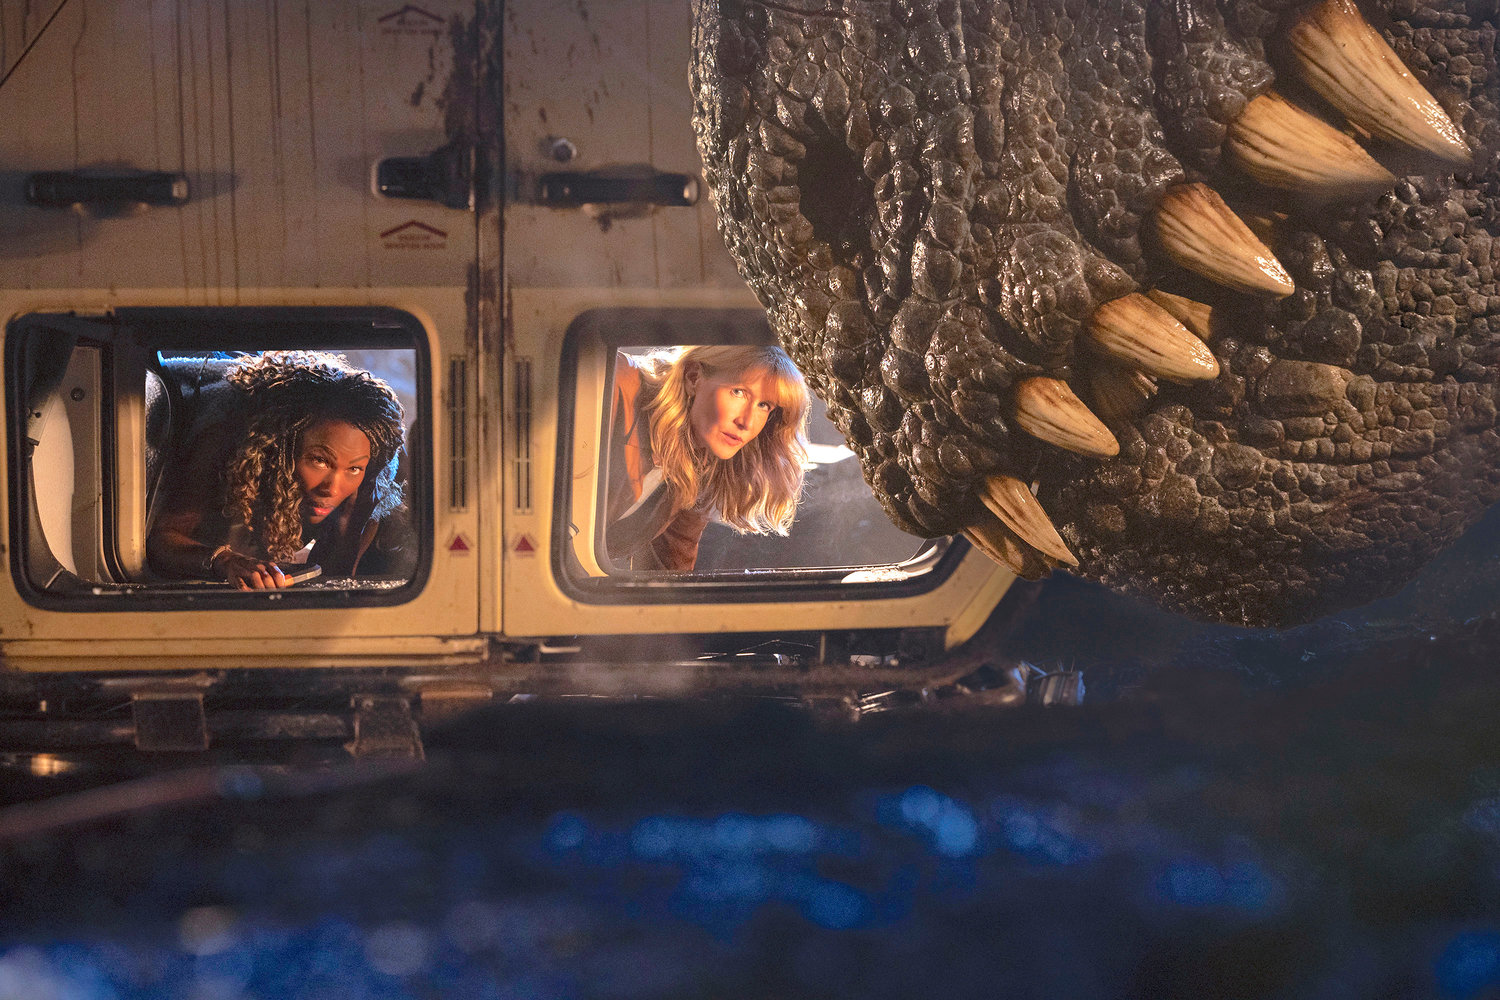 This image released by Universal Pictures shows DeWanda Wise, left, and Laura Dern in a scene from "Jurassic World Dominion." (Universal Pictures and Amblin Entertainment via AP)